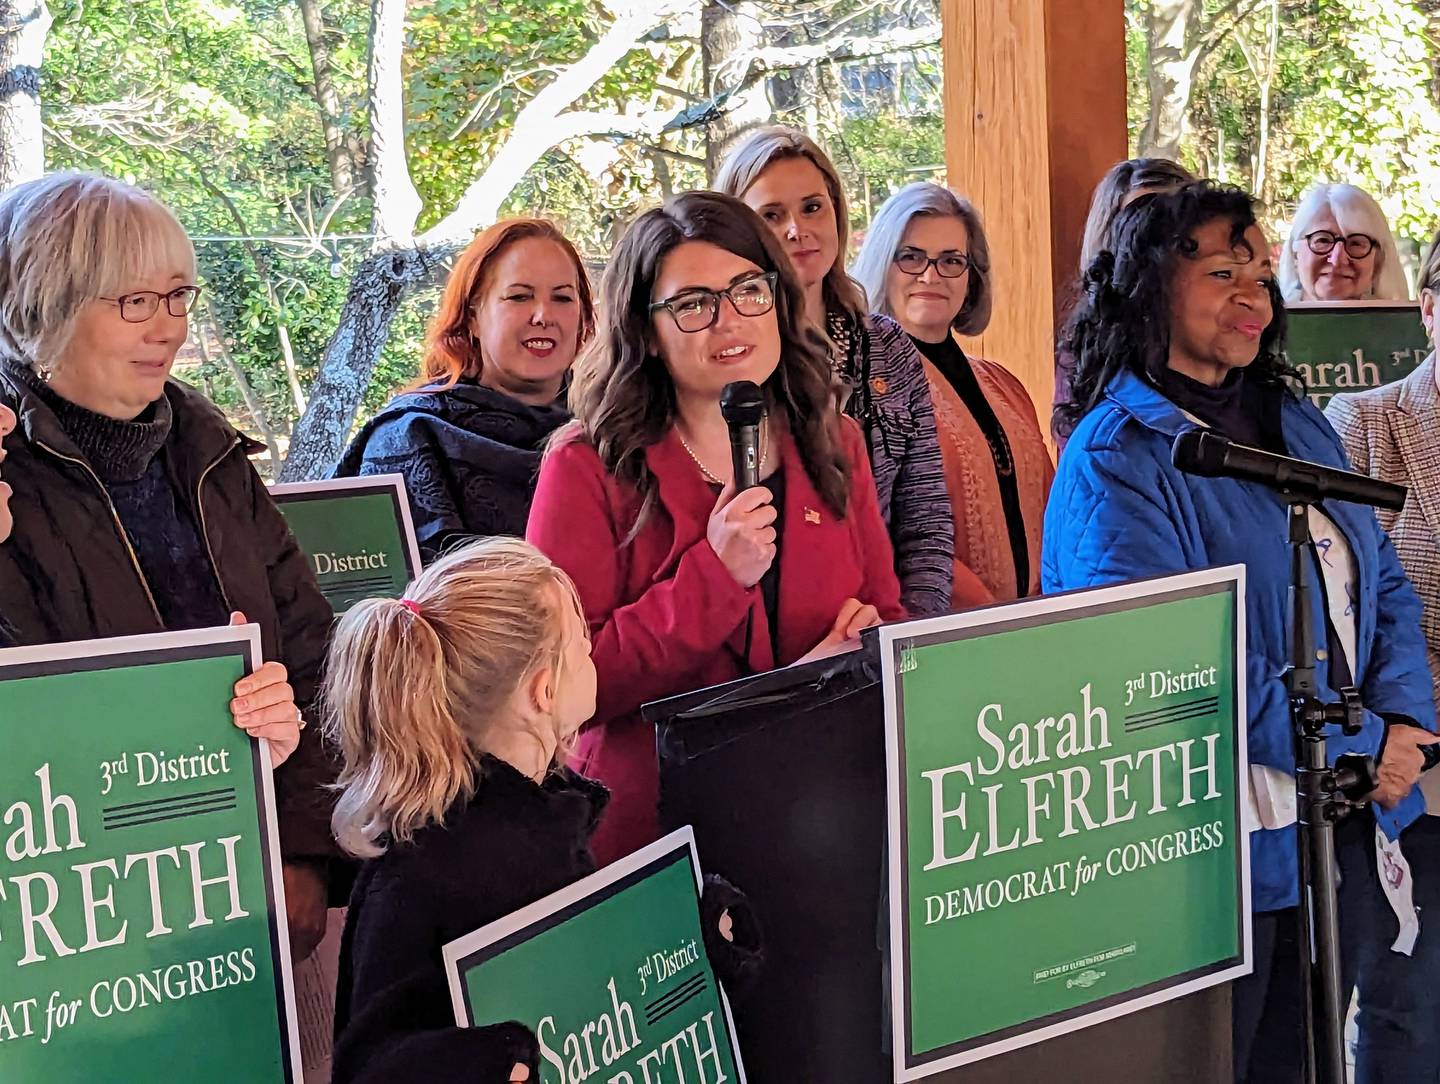 "I'm here today to make an important announcement and something I'm going to have to get used to saying over and over again until I'm blue in the face," State Sen. Sarah Elfreth said Saturday in Annapolis. "But my name is Sarah Elfreth and I'm running to be your next congresswoman."